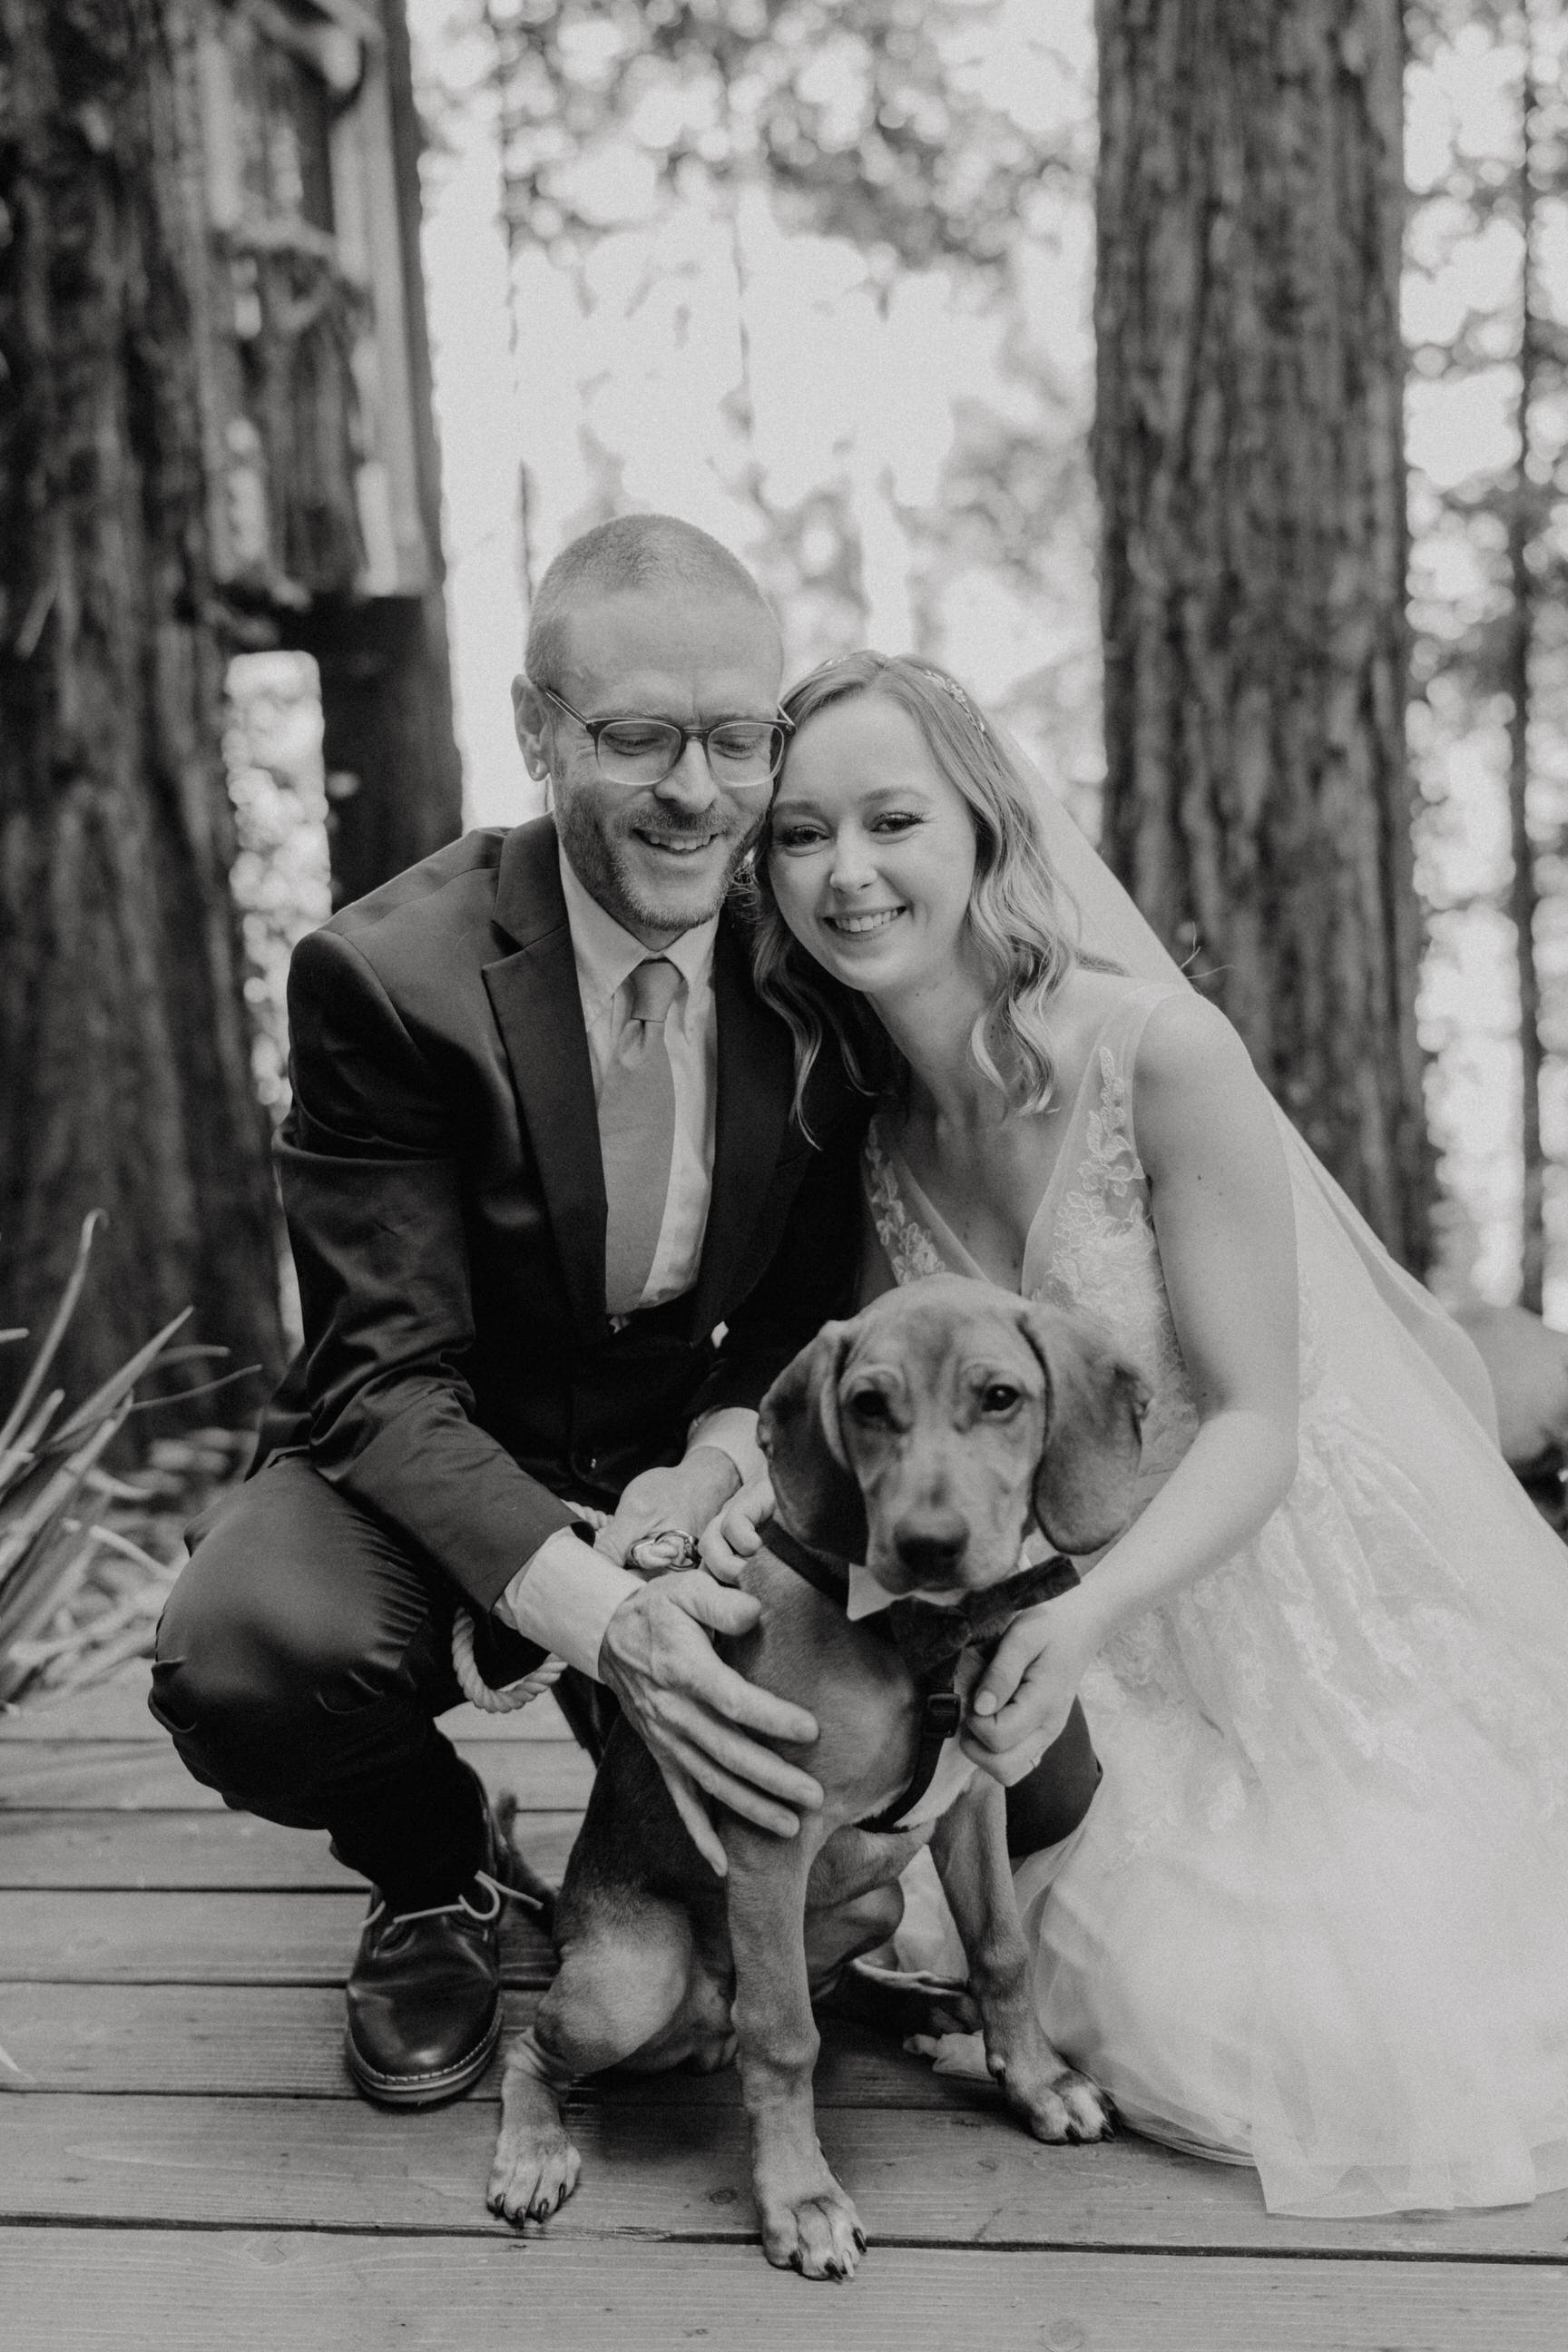 Wedding-in-the-Woods-Bride-and-Groom-Holding-Rescue-Puppy-at-Elopement-beneath-Redwood-Trees (4).jpg